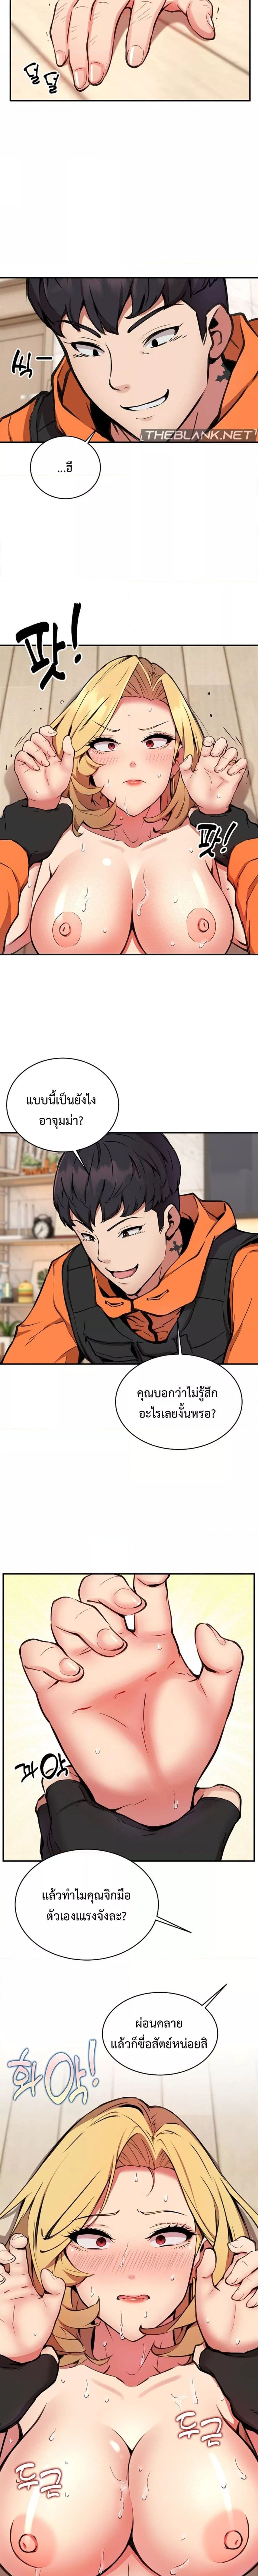 Driver in the New City ตอนที่ 5 ภาพ 11